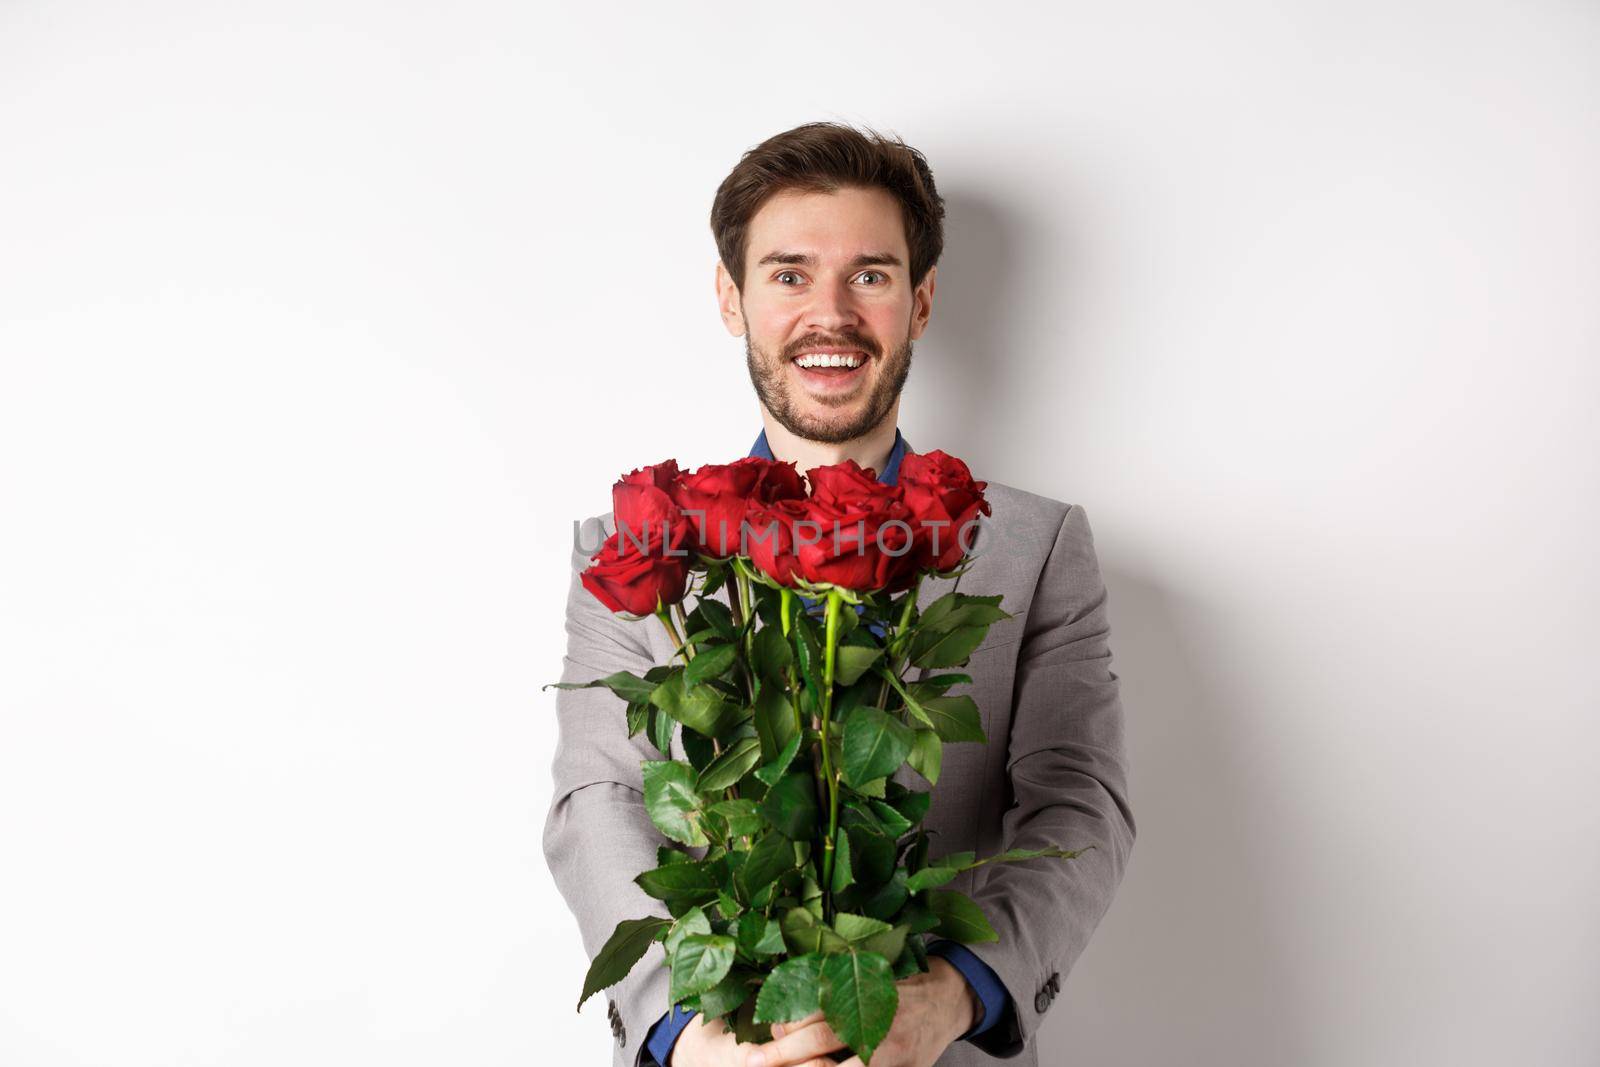 Handsome man in love wishing happy valentines day, giving bouquet of flowers on romantic date, smiling at camera, wearing suit over white background.